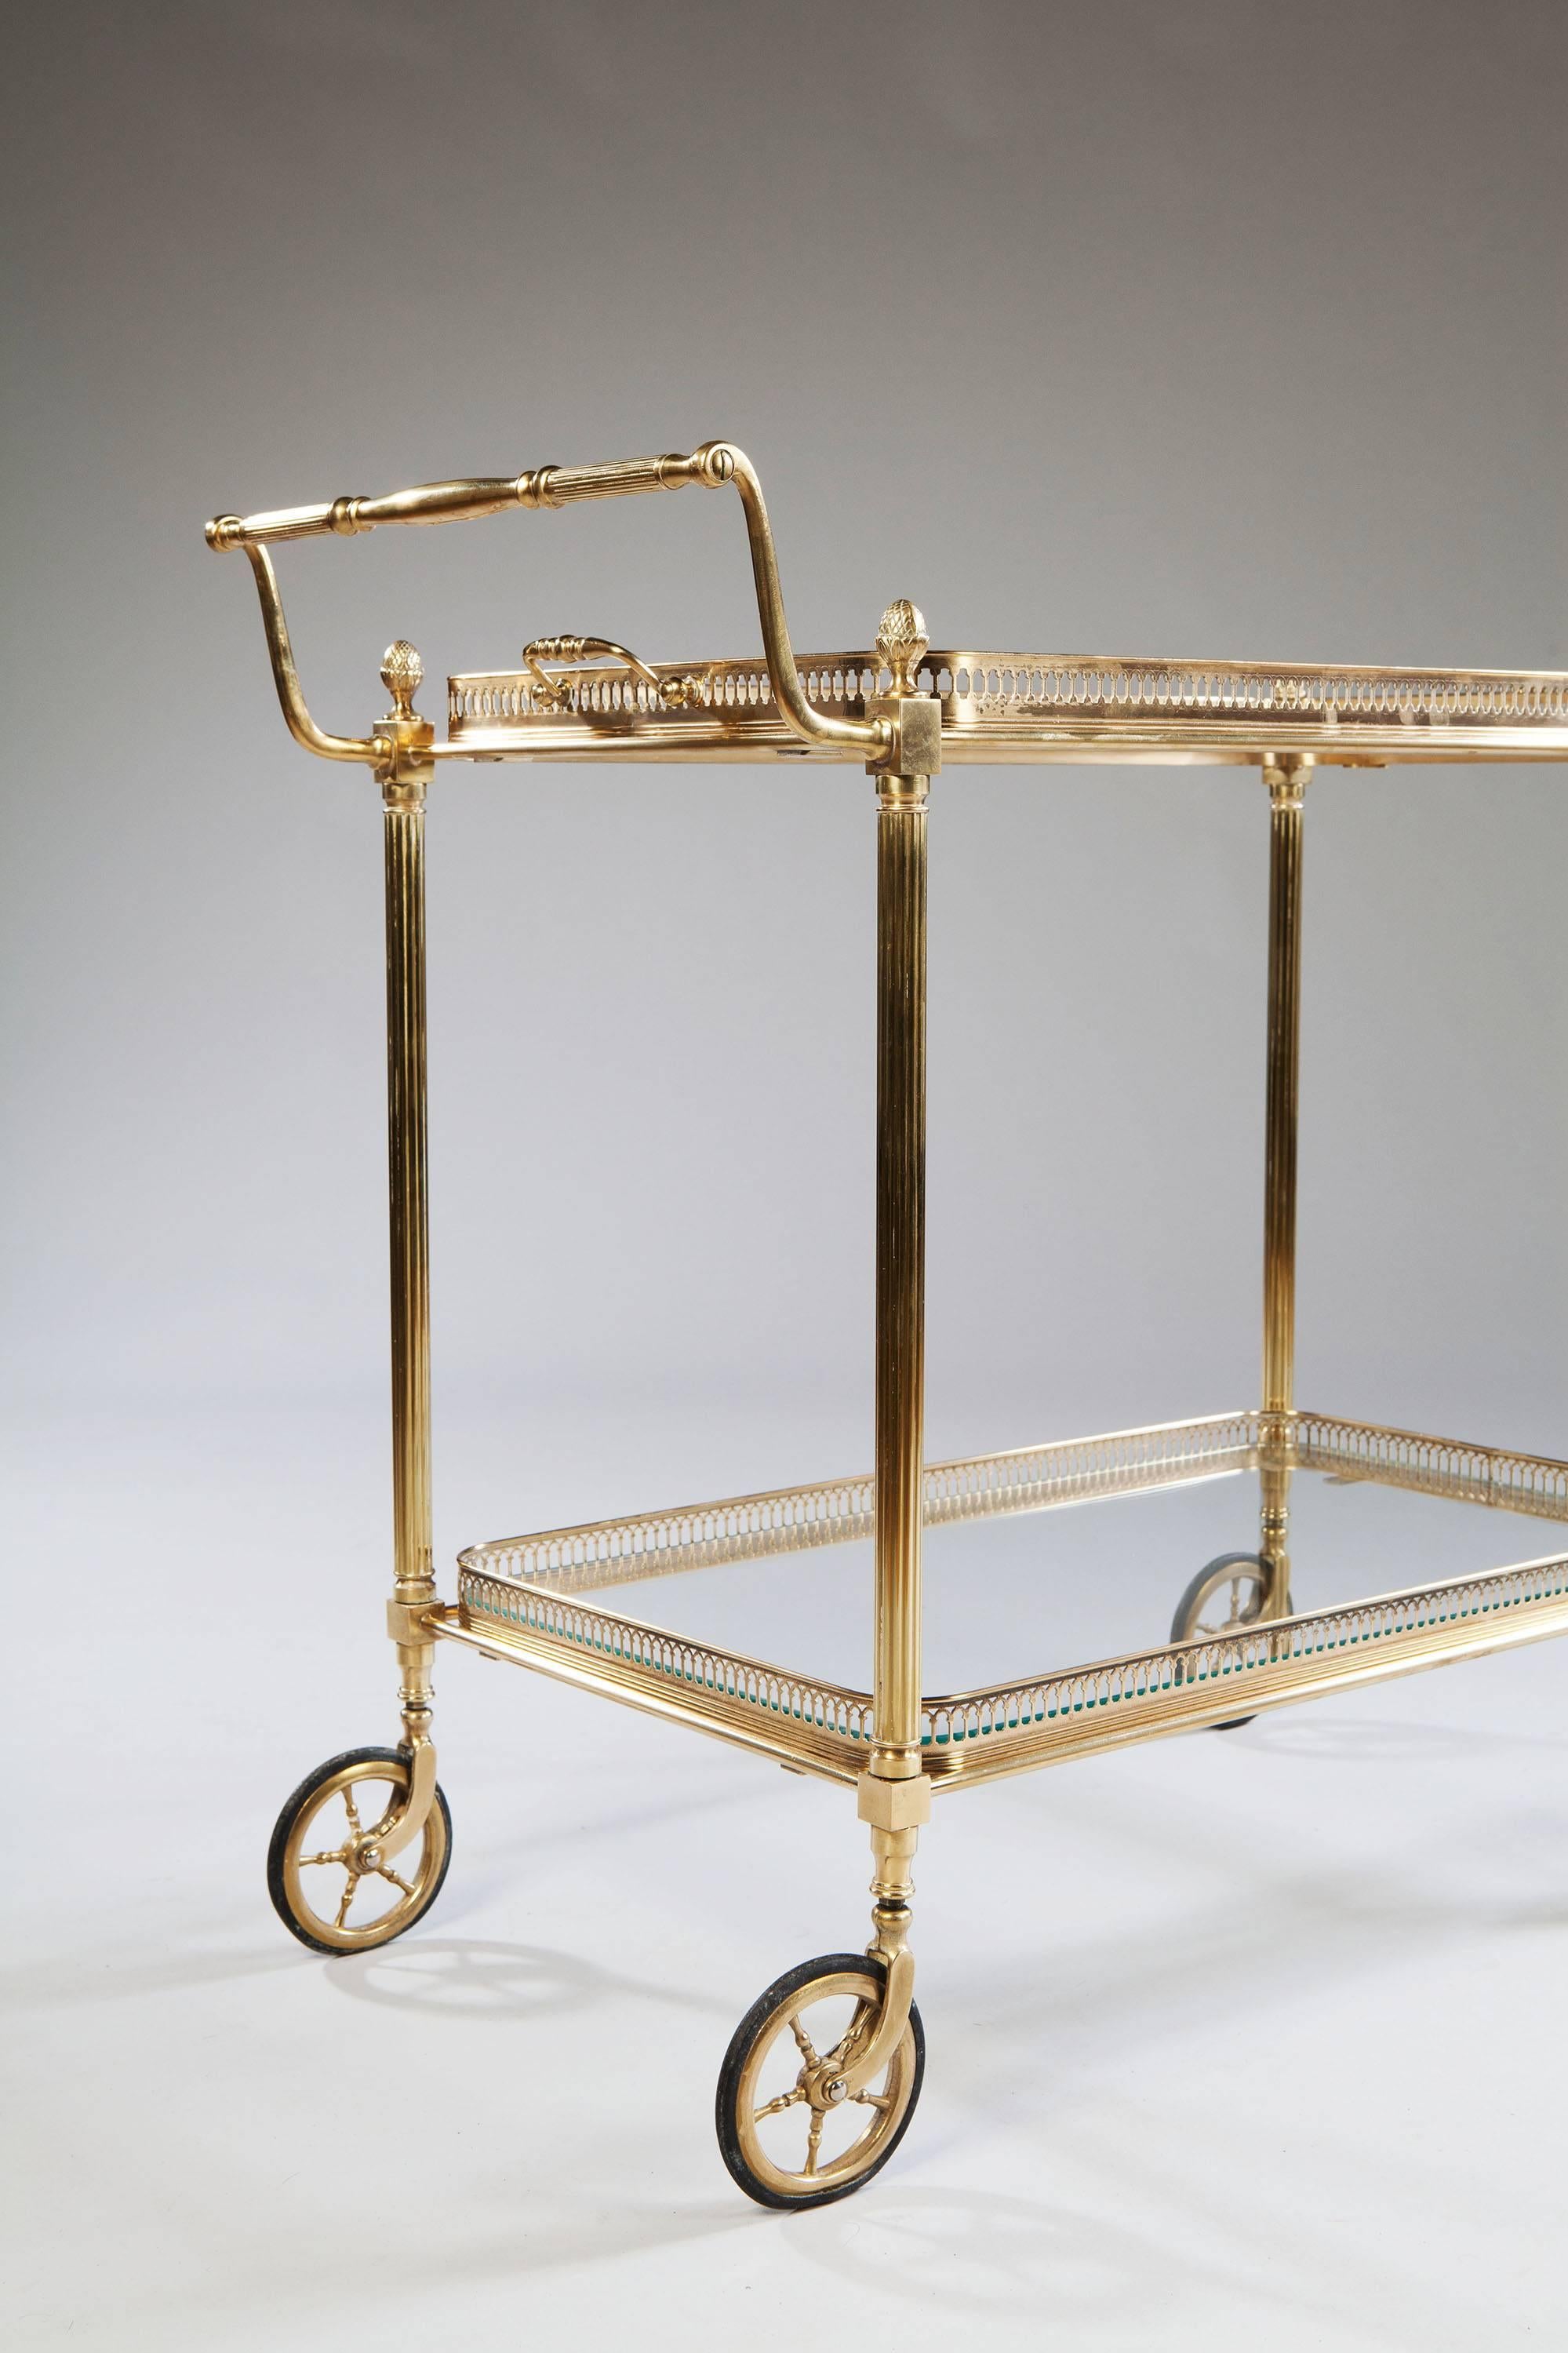 French Mid-Century Modern Brass Drinks Trolley, Bar or Cocktail Cart by Maison Bagues